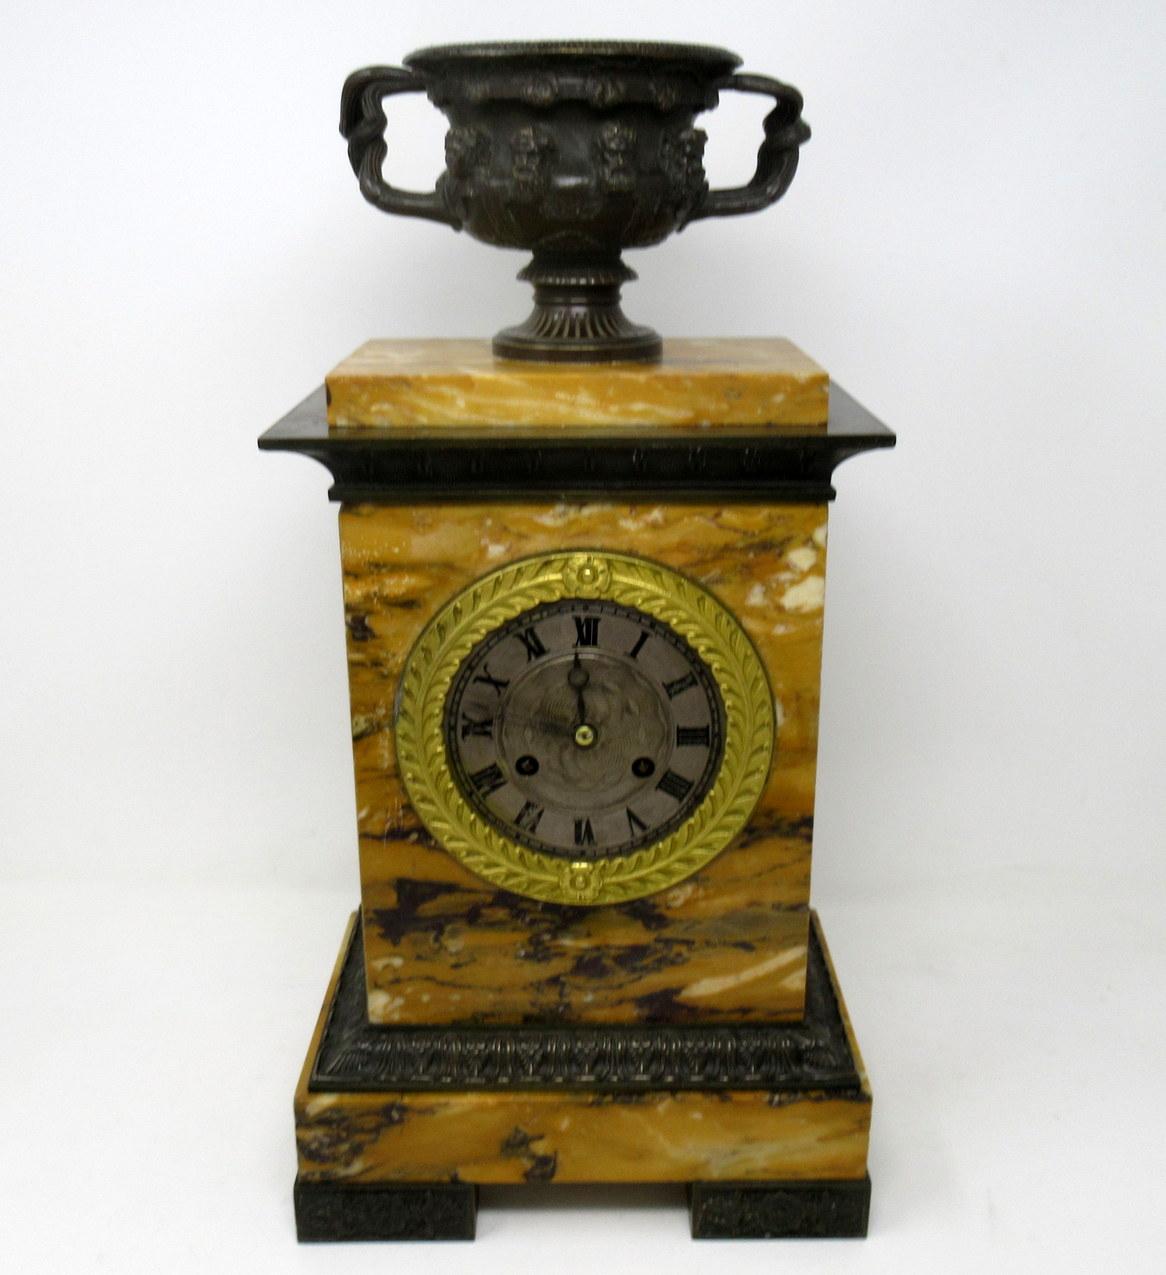 An exceptional well figured Sienna marble and finely cast patinated bronze mantel (fireplace) clock by the superb French clockmaker Honoré Pons, (1773-1851), first half of the 19th century.

The stunning example is mounted with a bronze model of